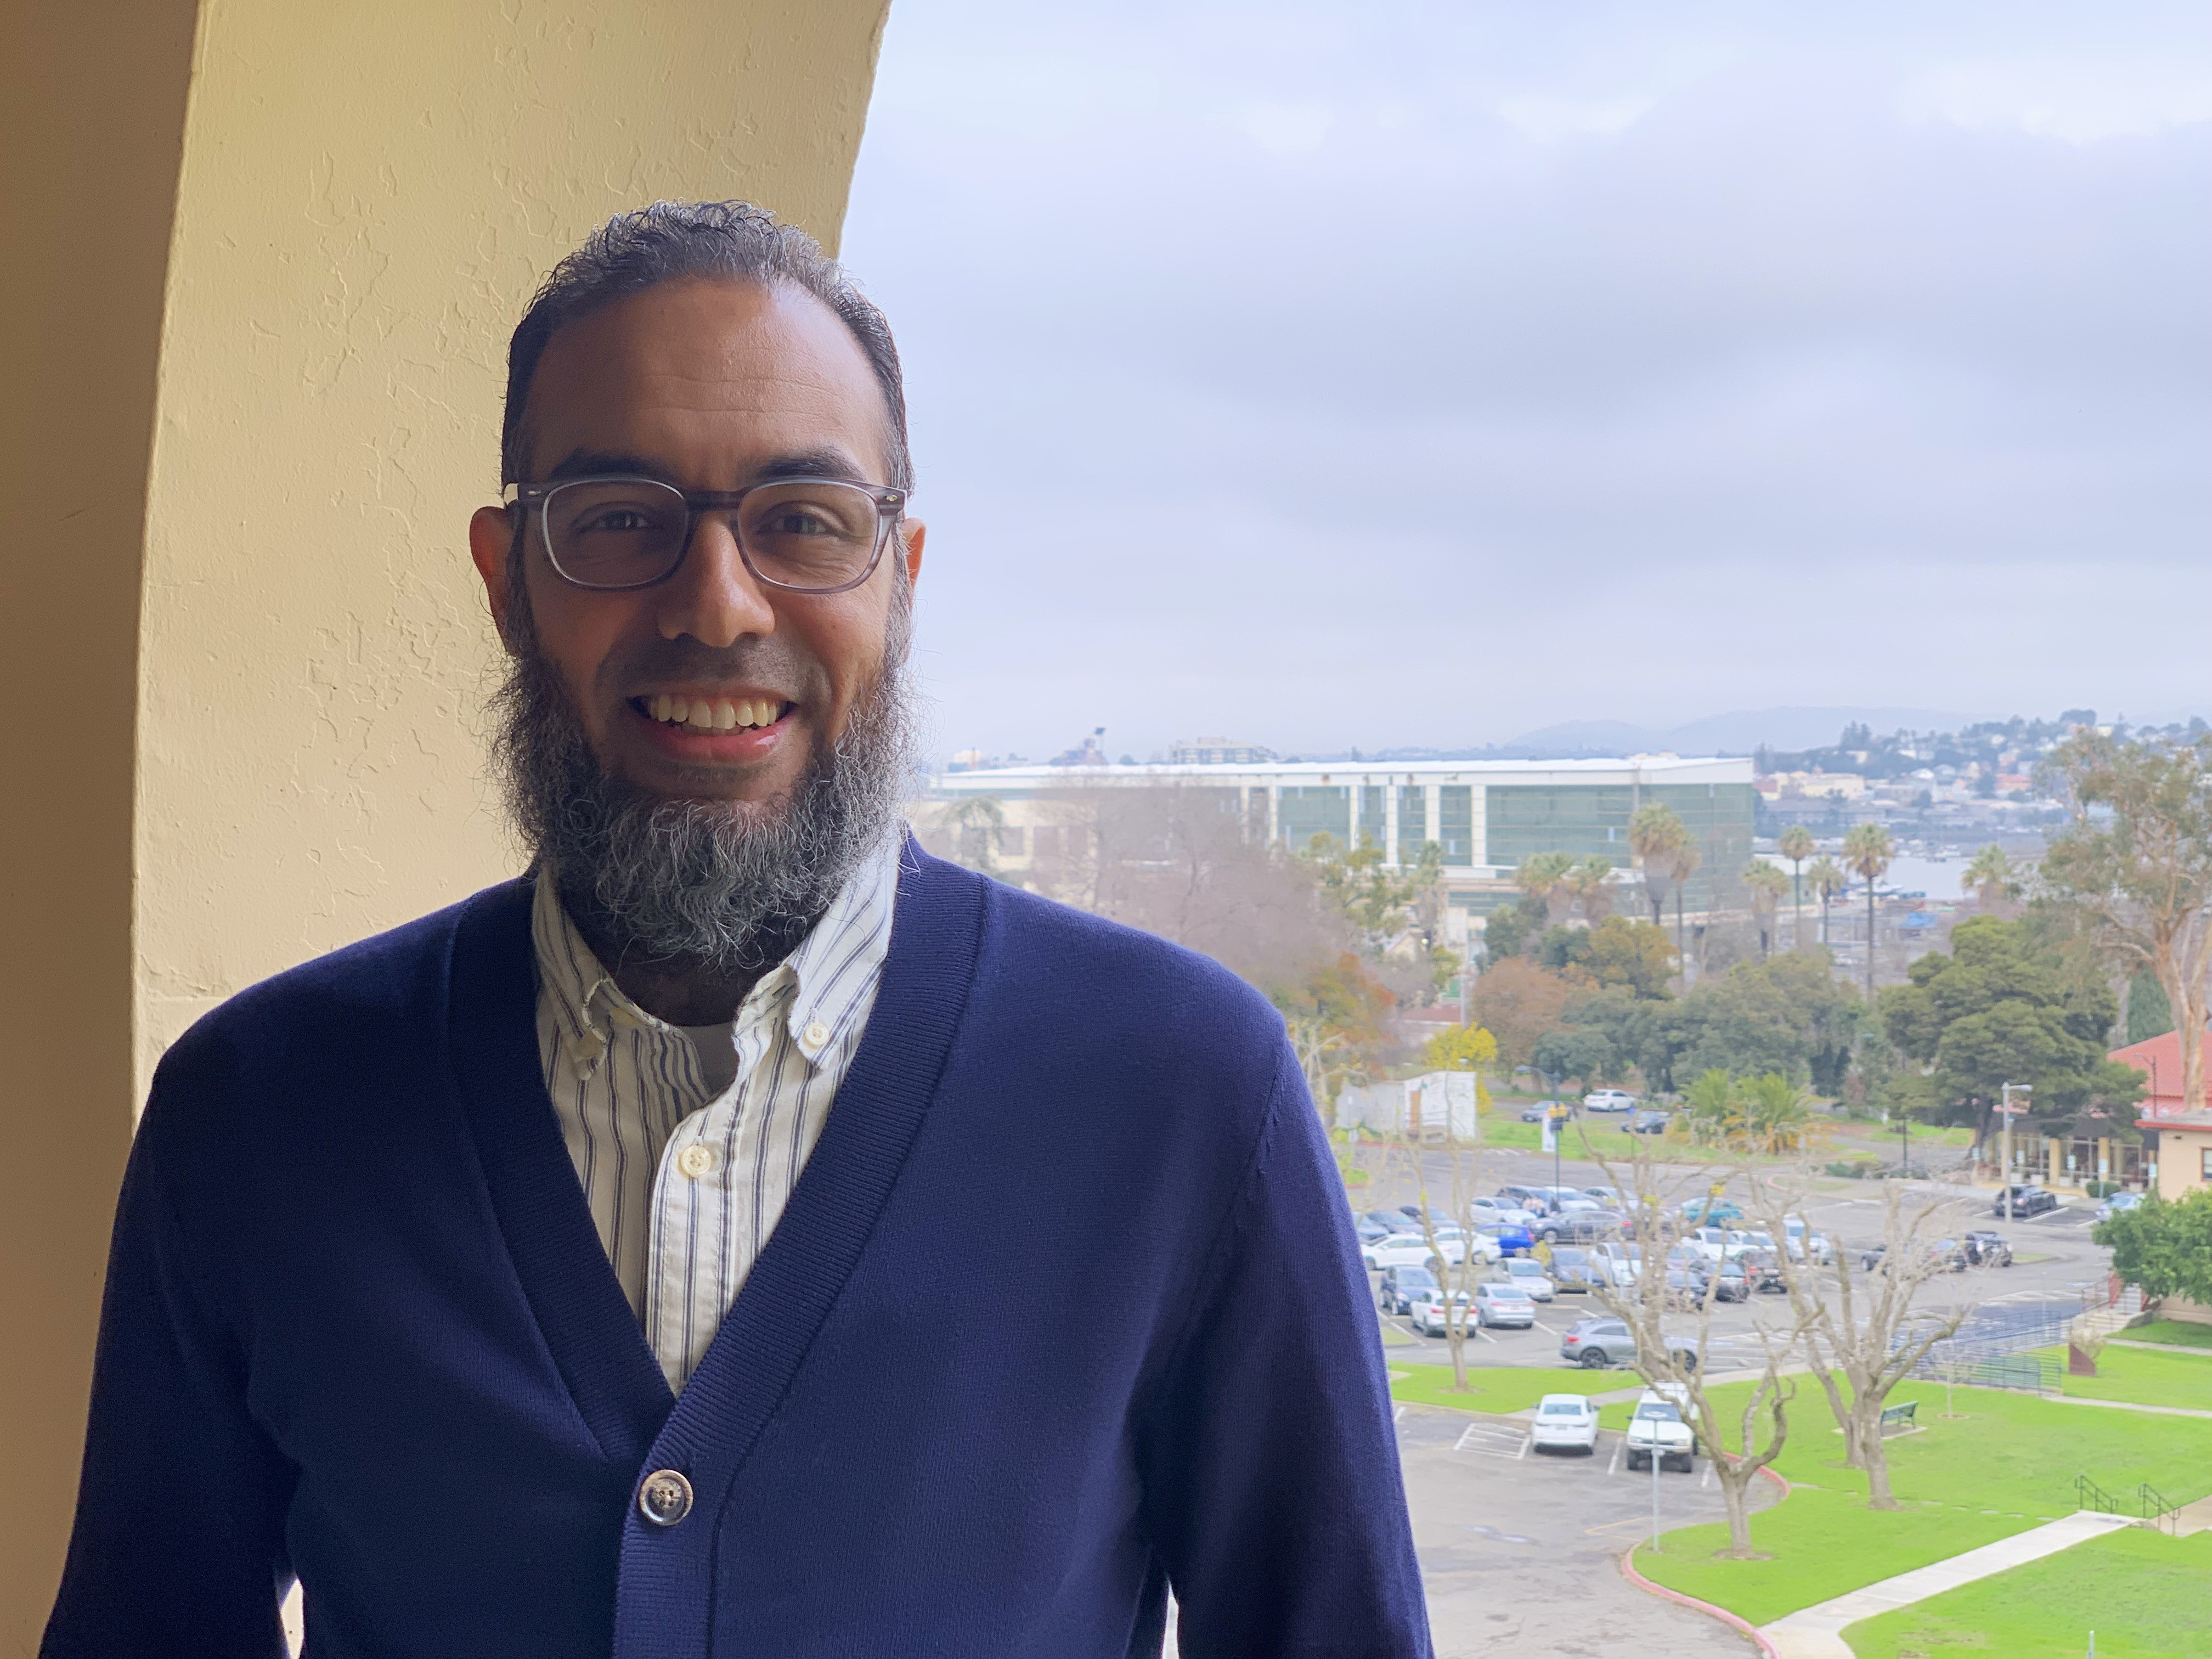  Associate Dean of the College of Education and Health Sciences Dr. Farid Khalafalla stands in front of a view of the lower Touro campus behind him